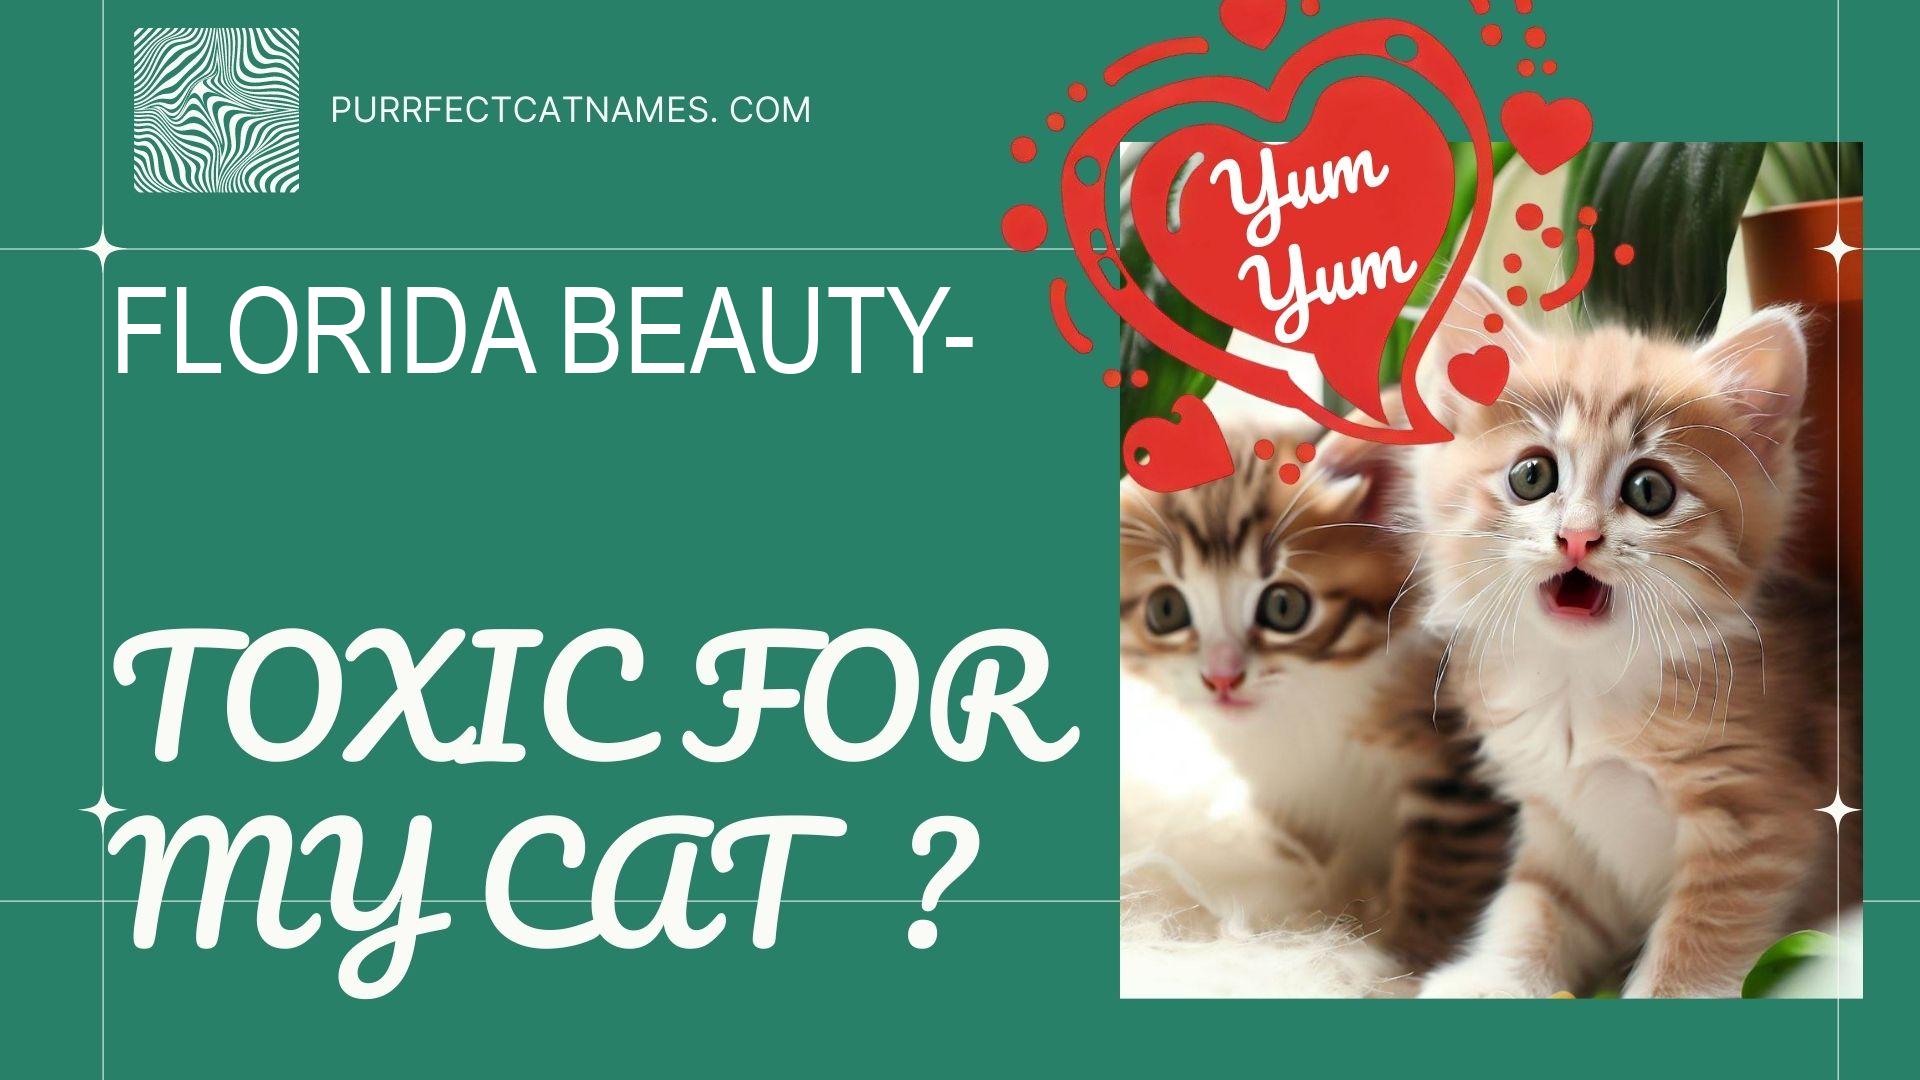 IsFlorida Beauty plant toxic for your cat